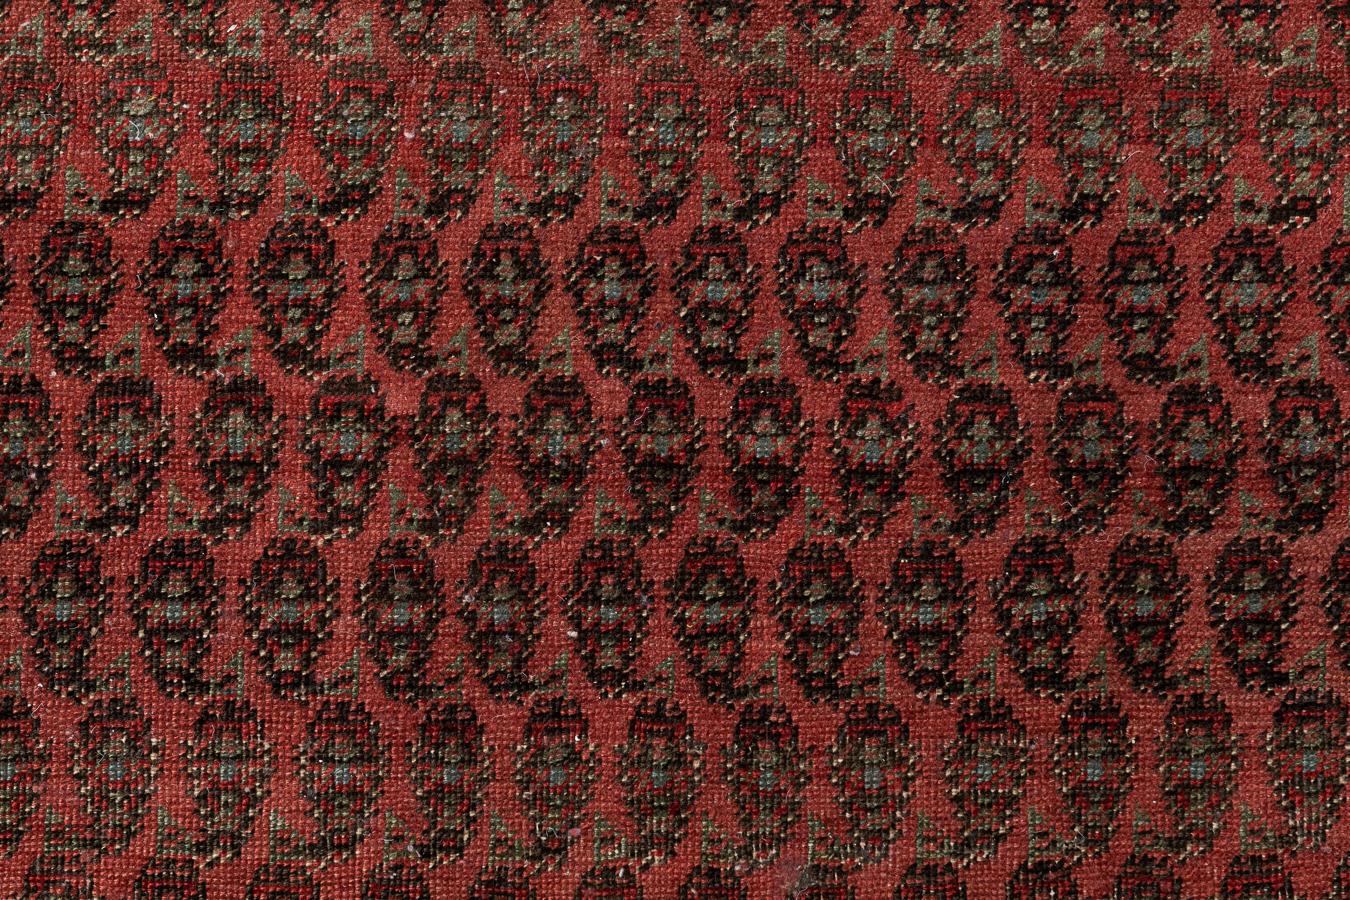 Seraband – West Central Persia

Sparkling wool and vivid colours dyed with natural dyes give this 120-year-old Persian gallery Seraband a vibrant effect. The gallery is composed of red fields with repeated designs of boteh (“seed of life”) and small